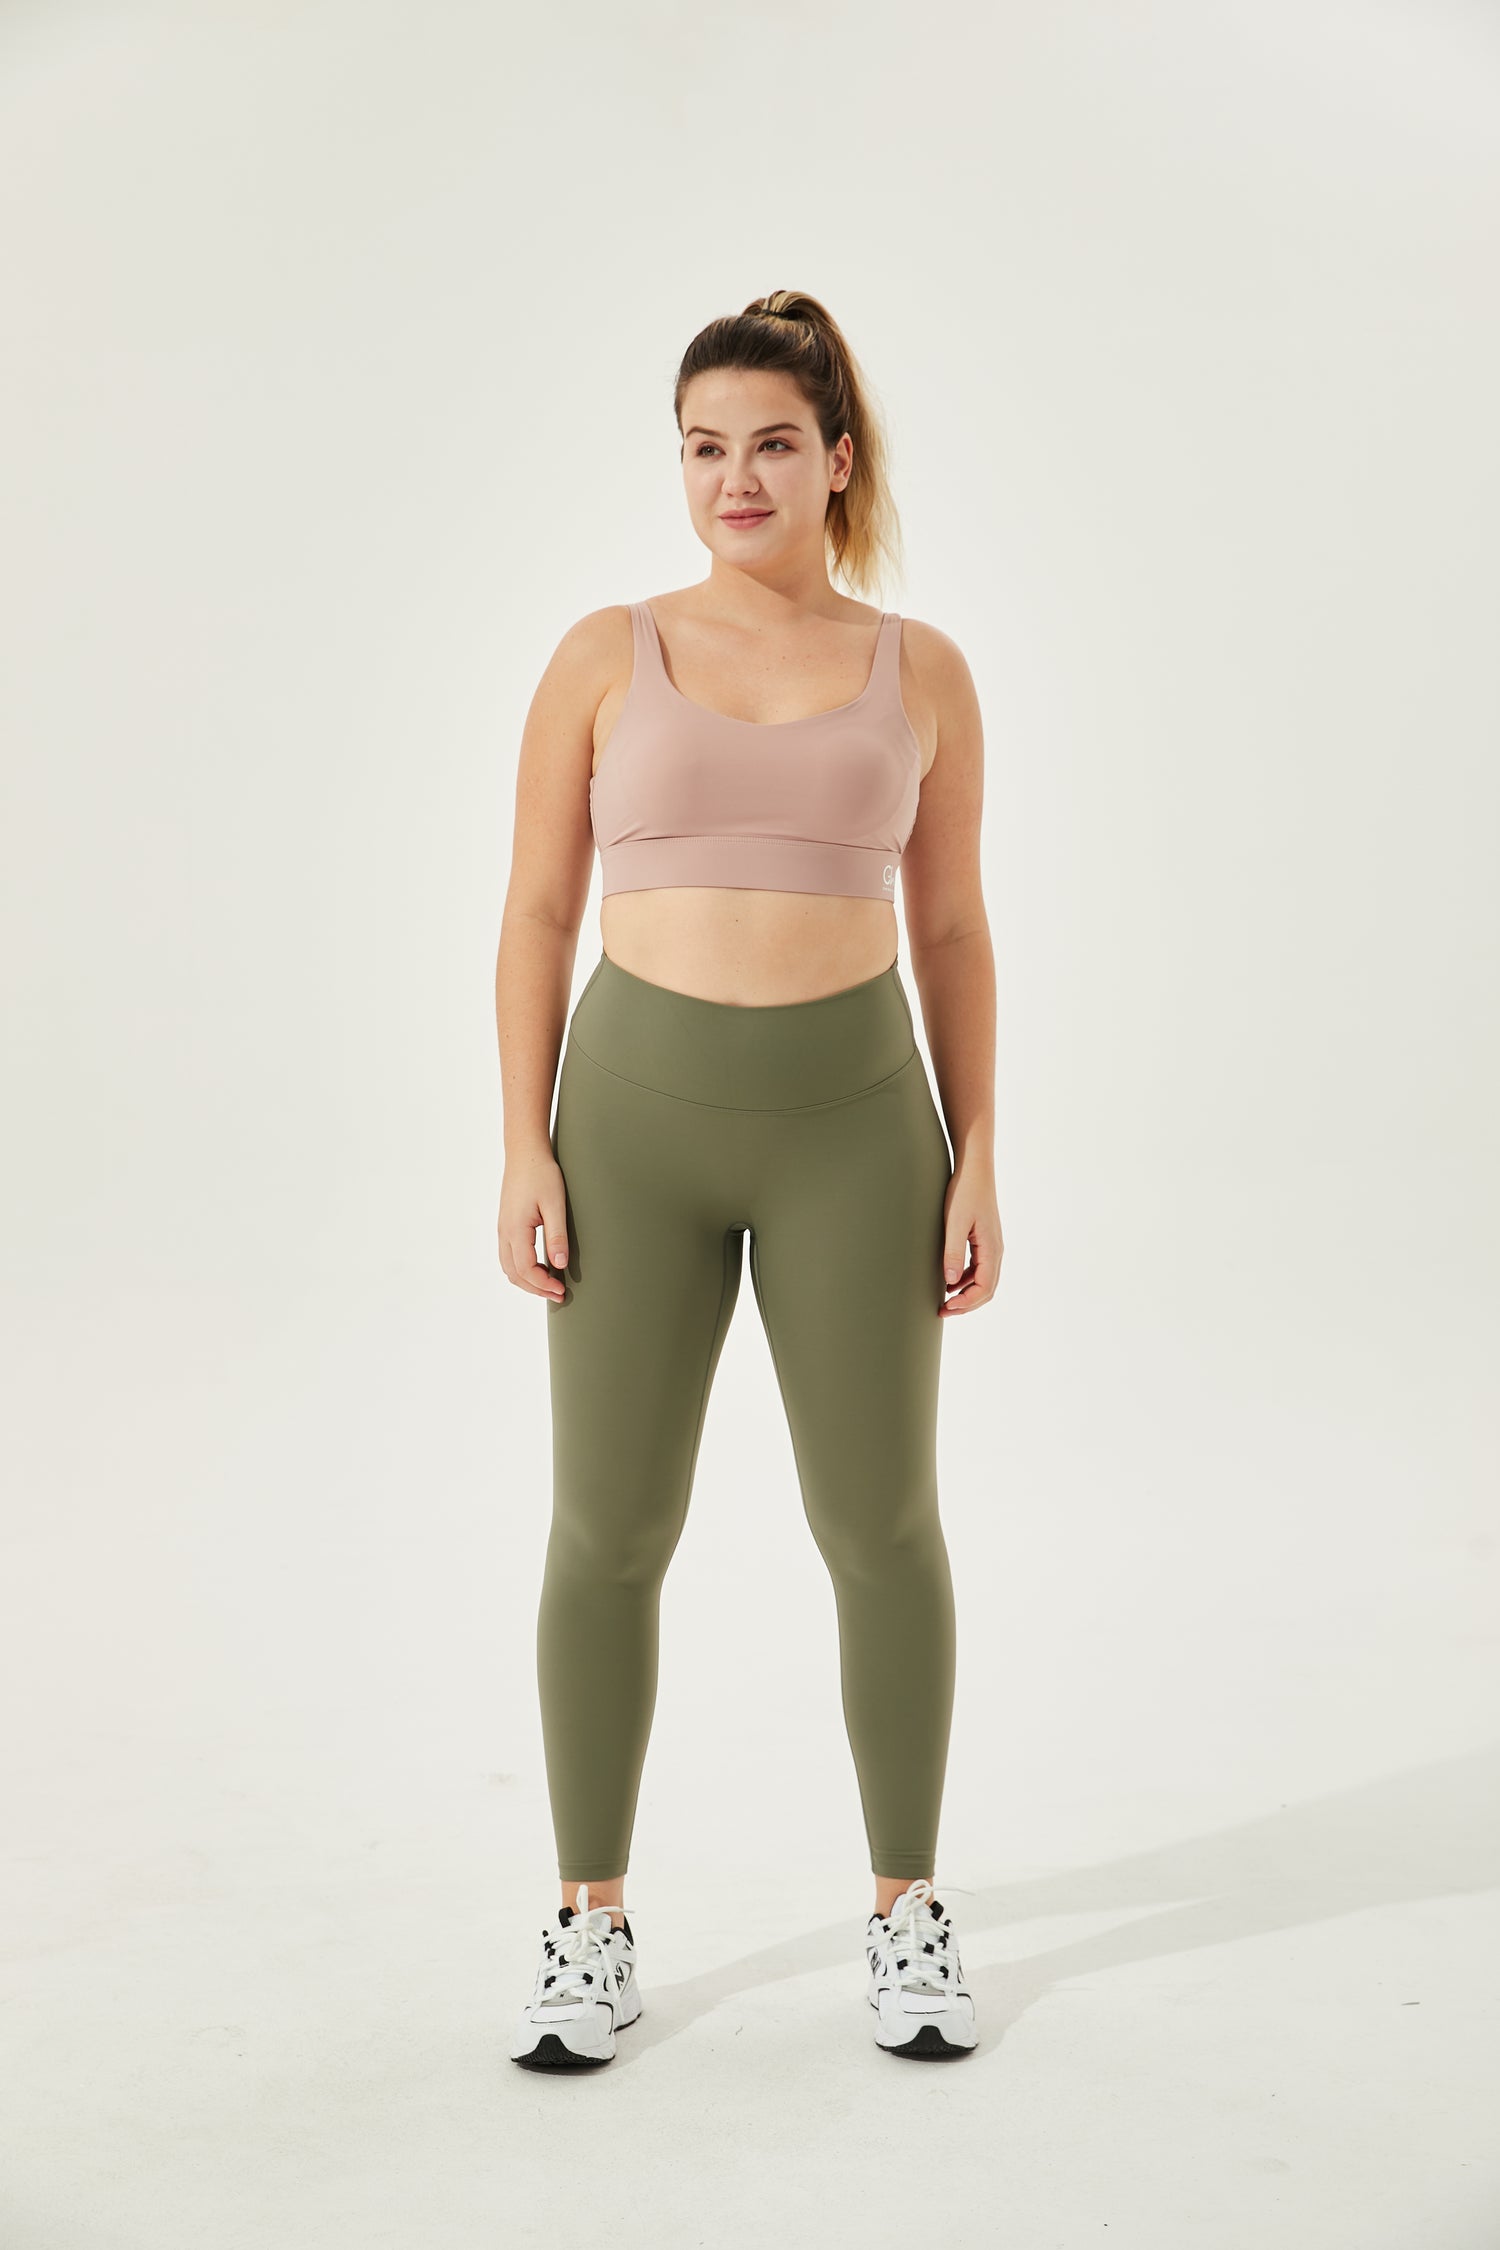 Cameltoe Yogawear flexable breathable clothing that goes the distance |  Leggings